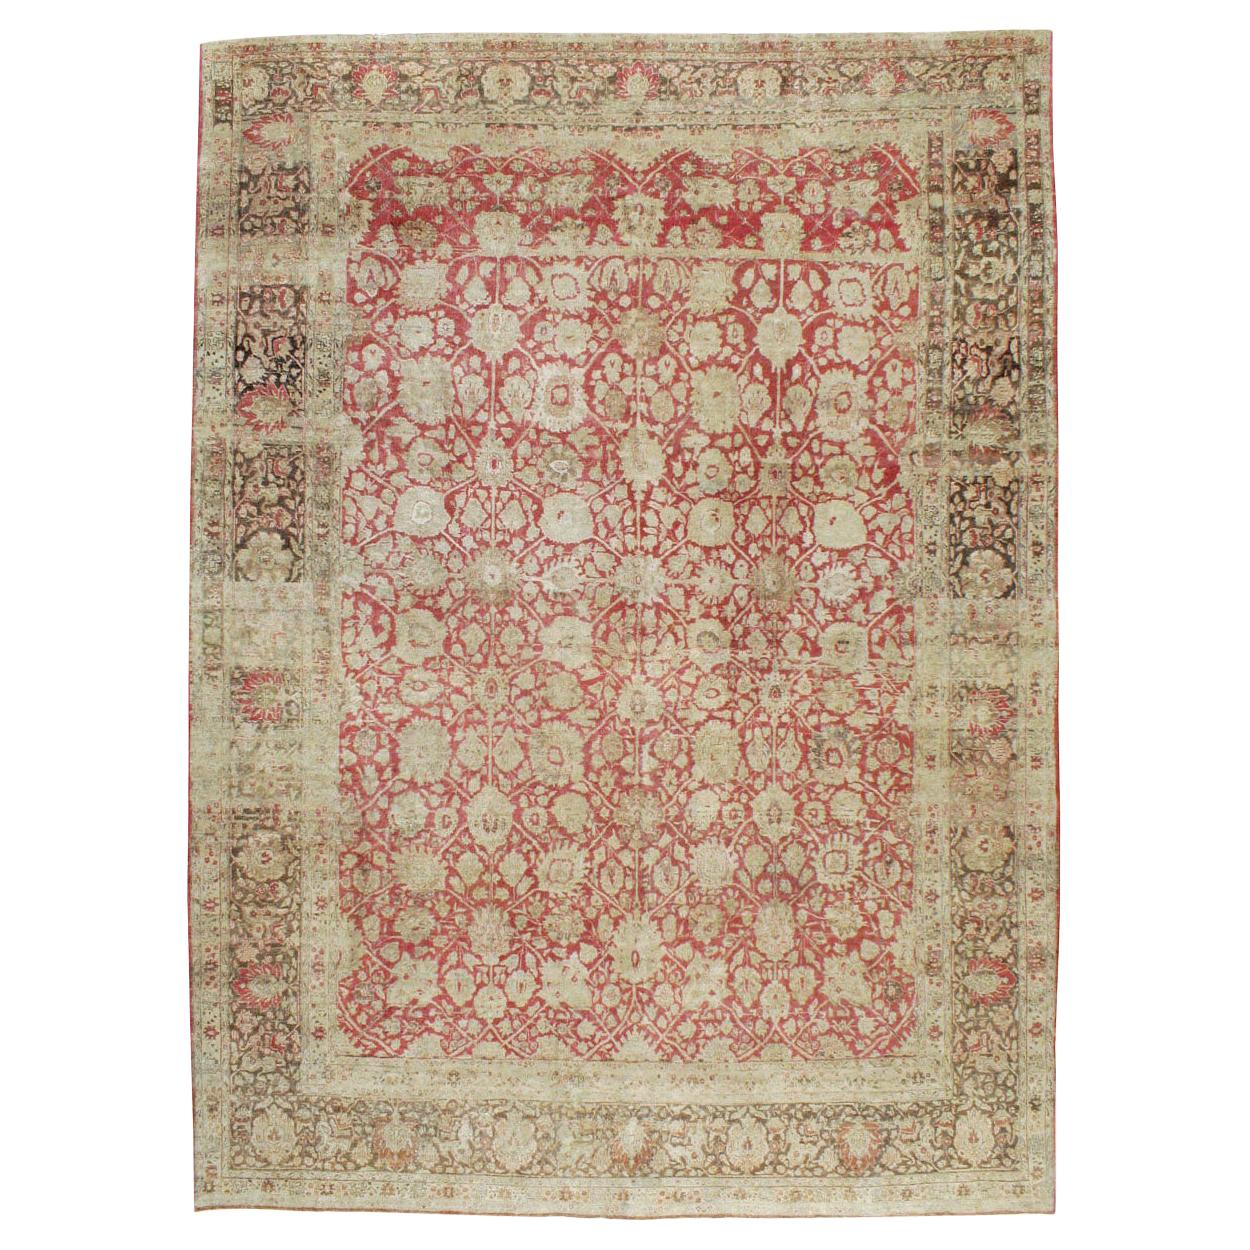 Early 20th Century Handmade Persian Tabriz Large Room Size Carpet For Sale